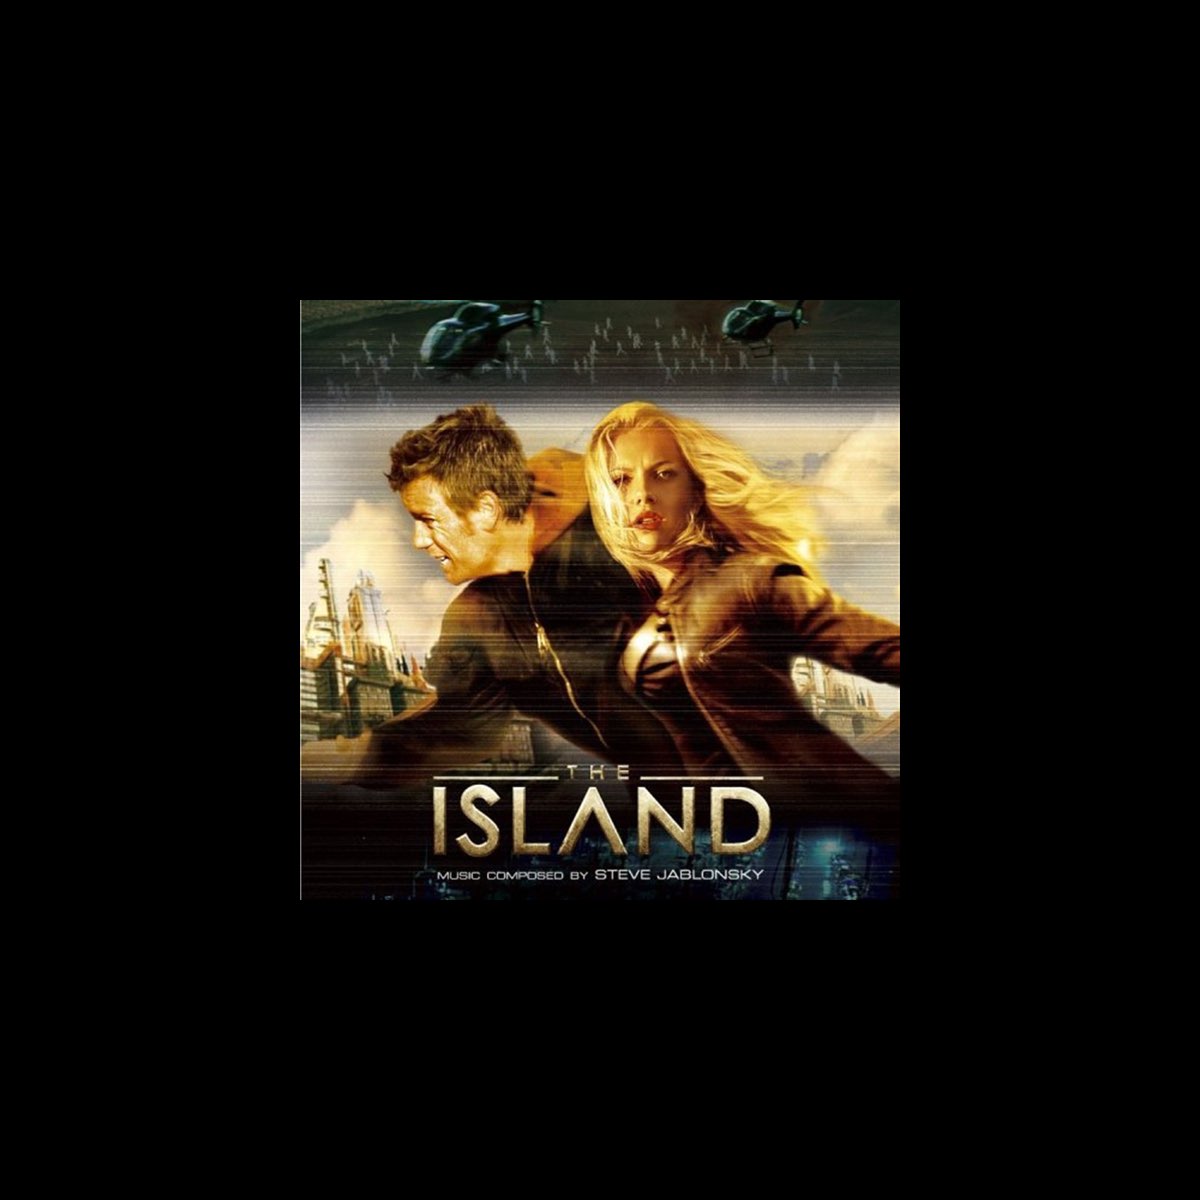 ‎The Island (Soundtrack from the Motion Picture) by Steve Jablonsky on Apple Music